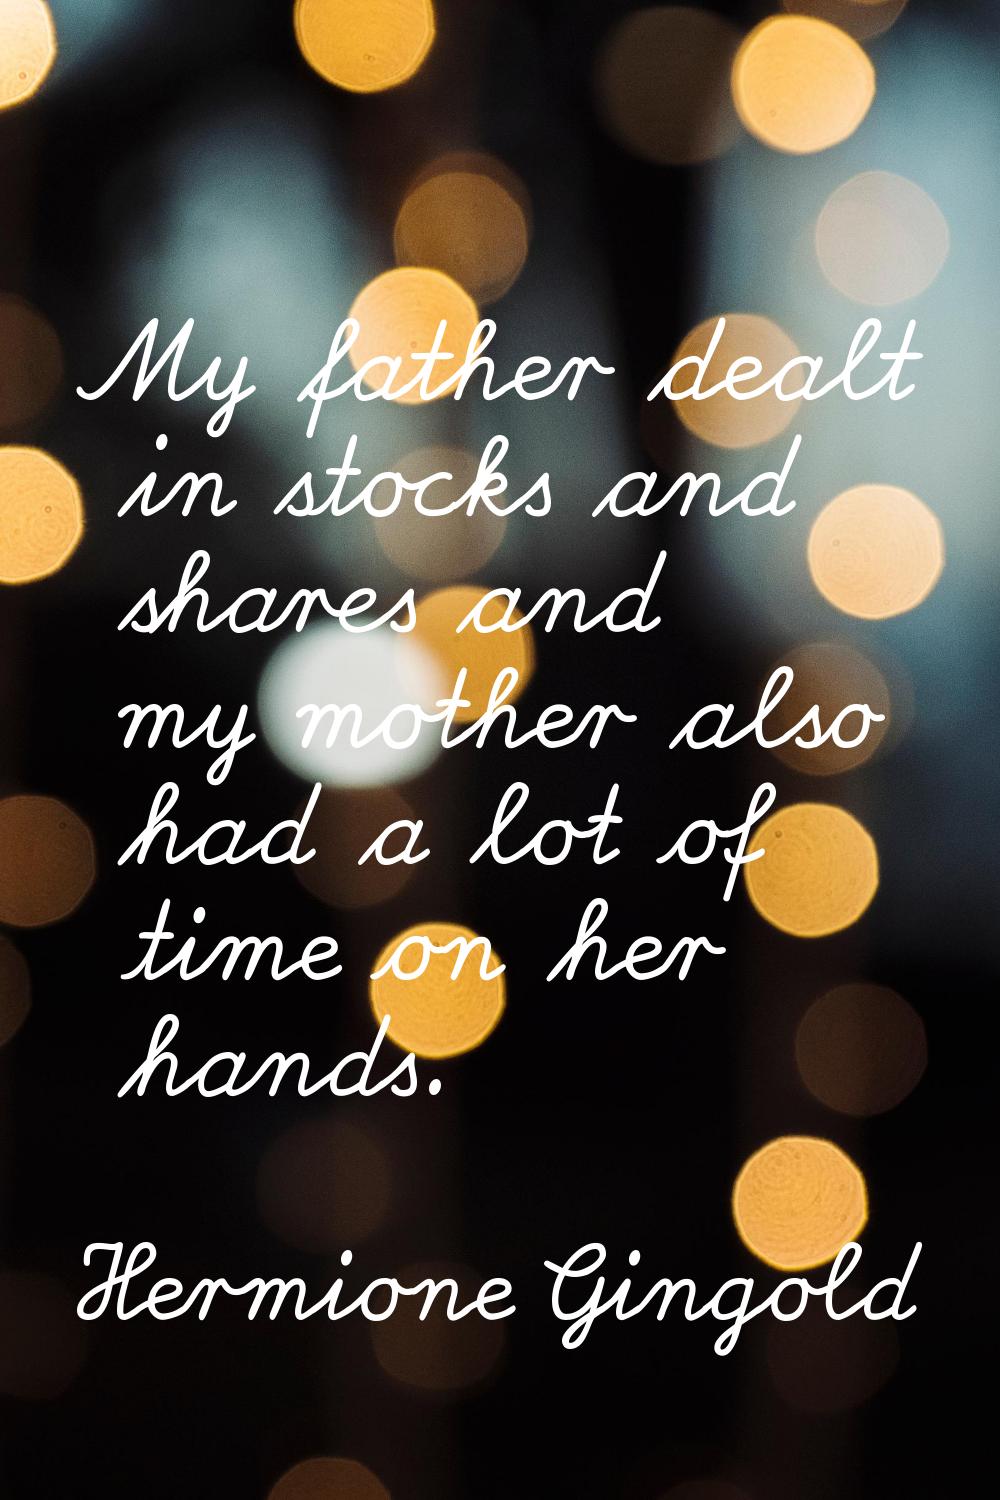 My father dealt in stocks and shares and my mother also had a lot of time on her hands.